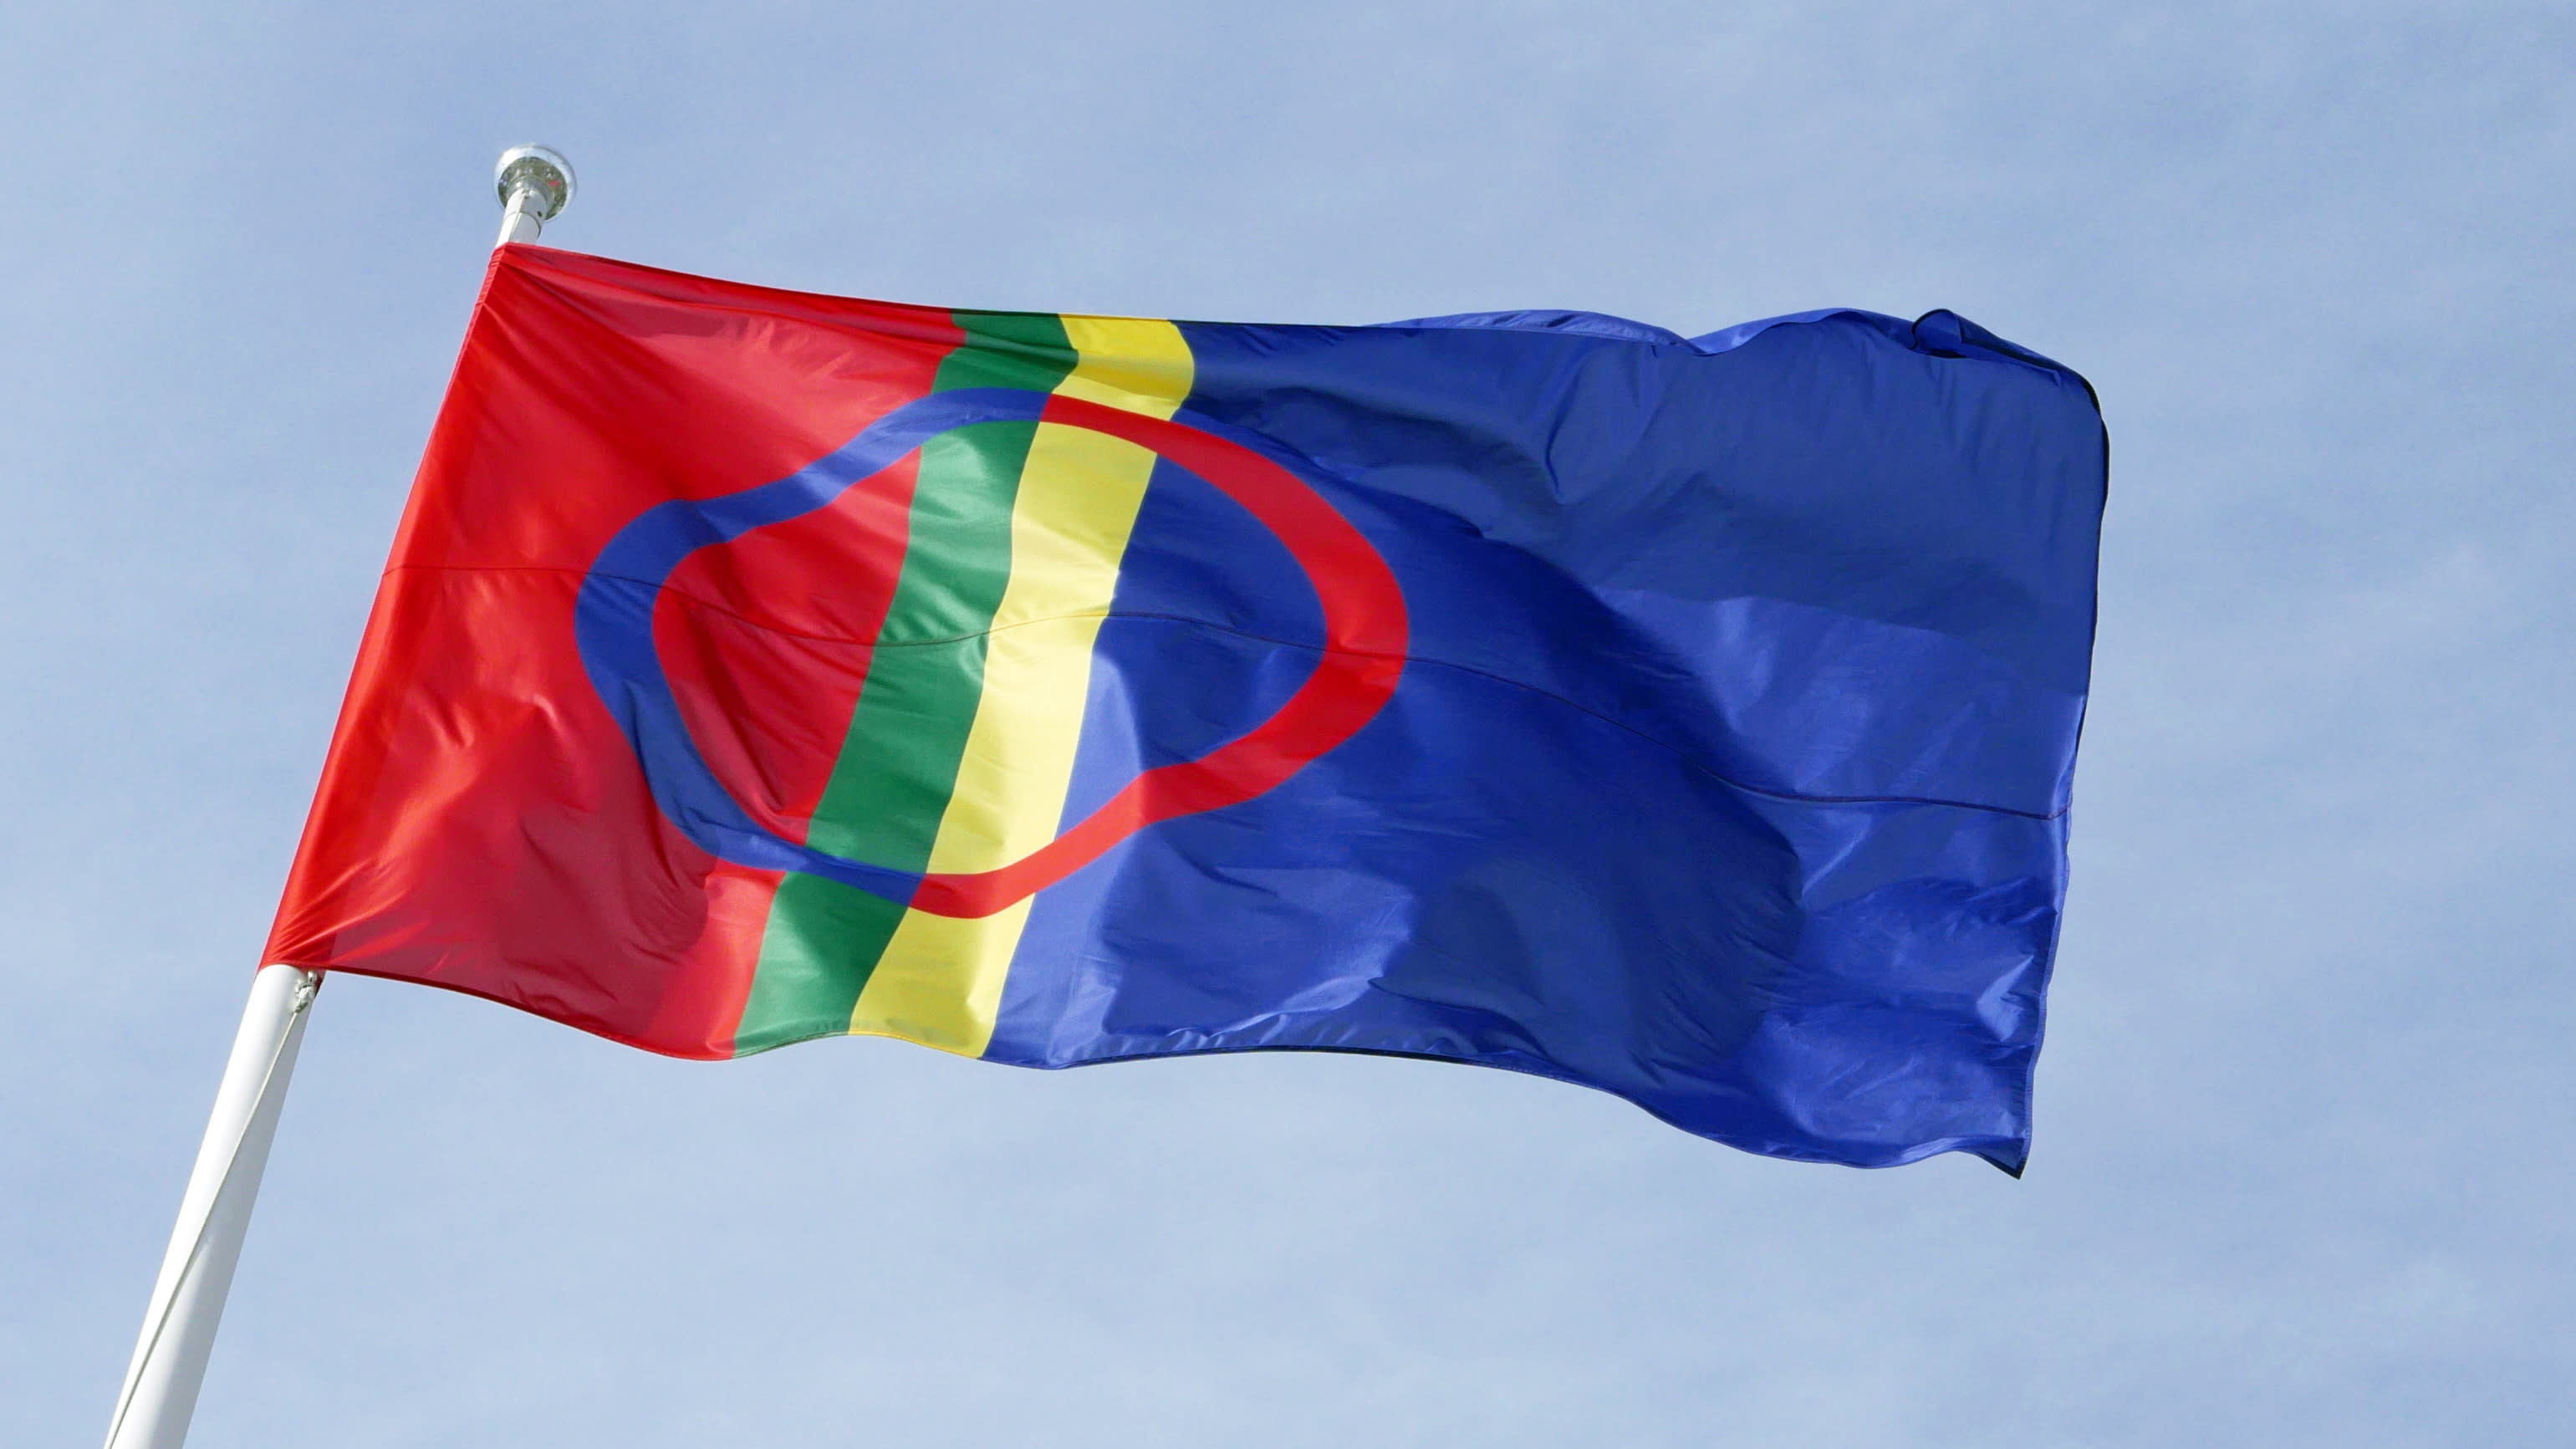 Psychosocial support for the Sámi was proposed before the Conciliation Committee